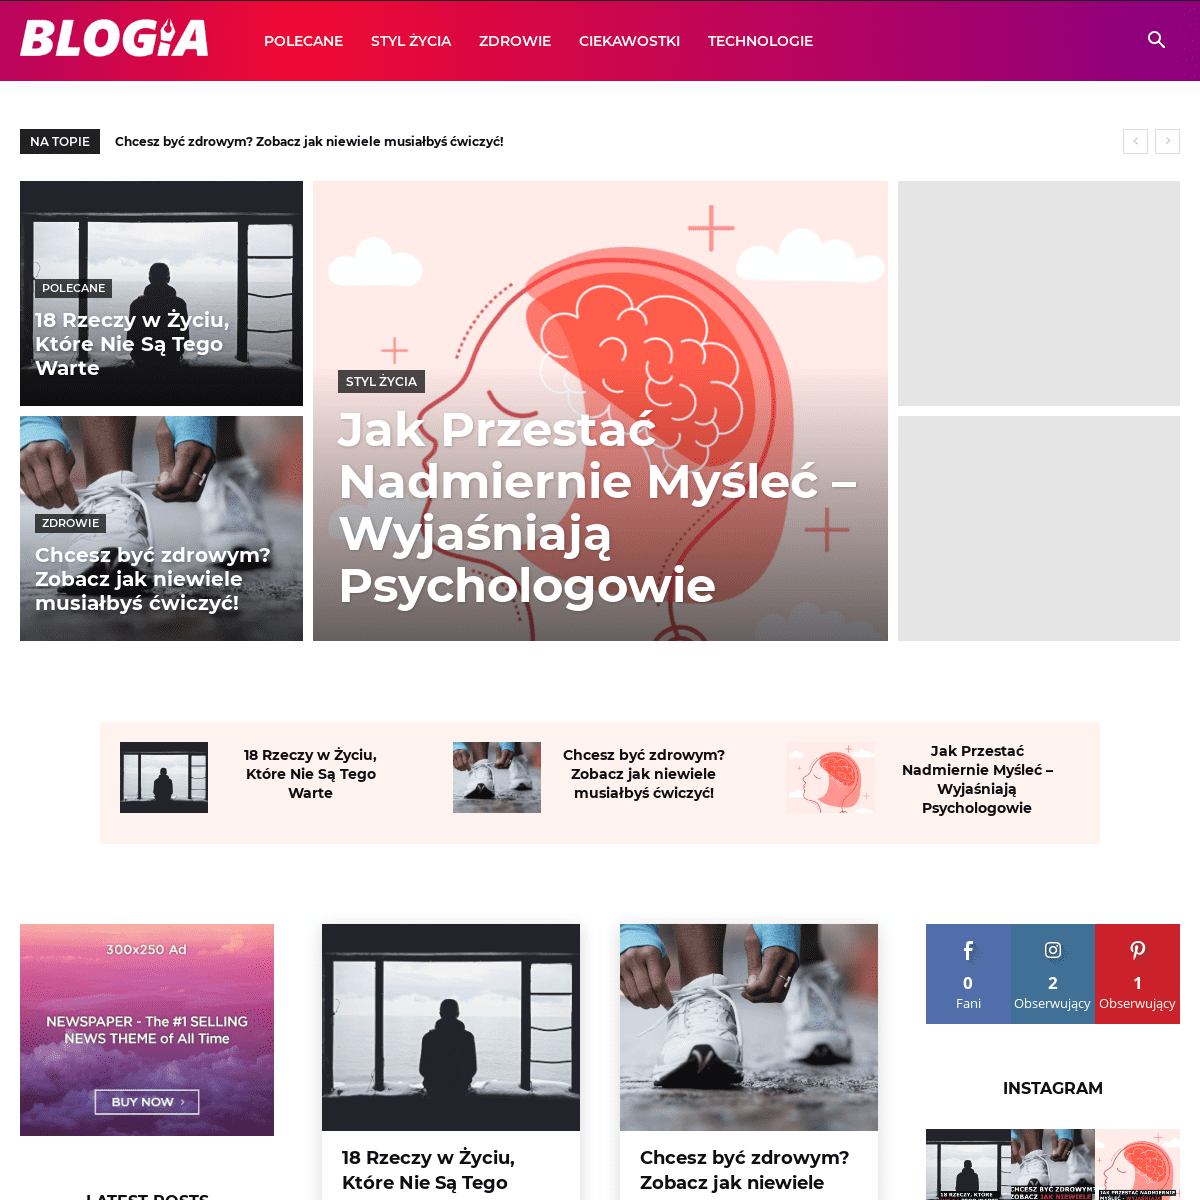 A complete backup of blogia.pl